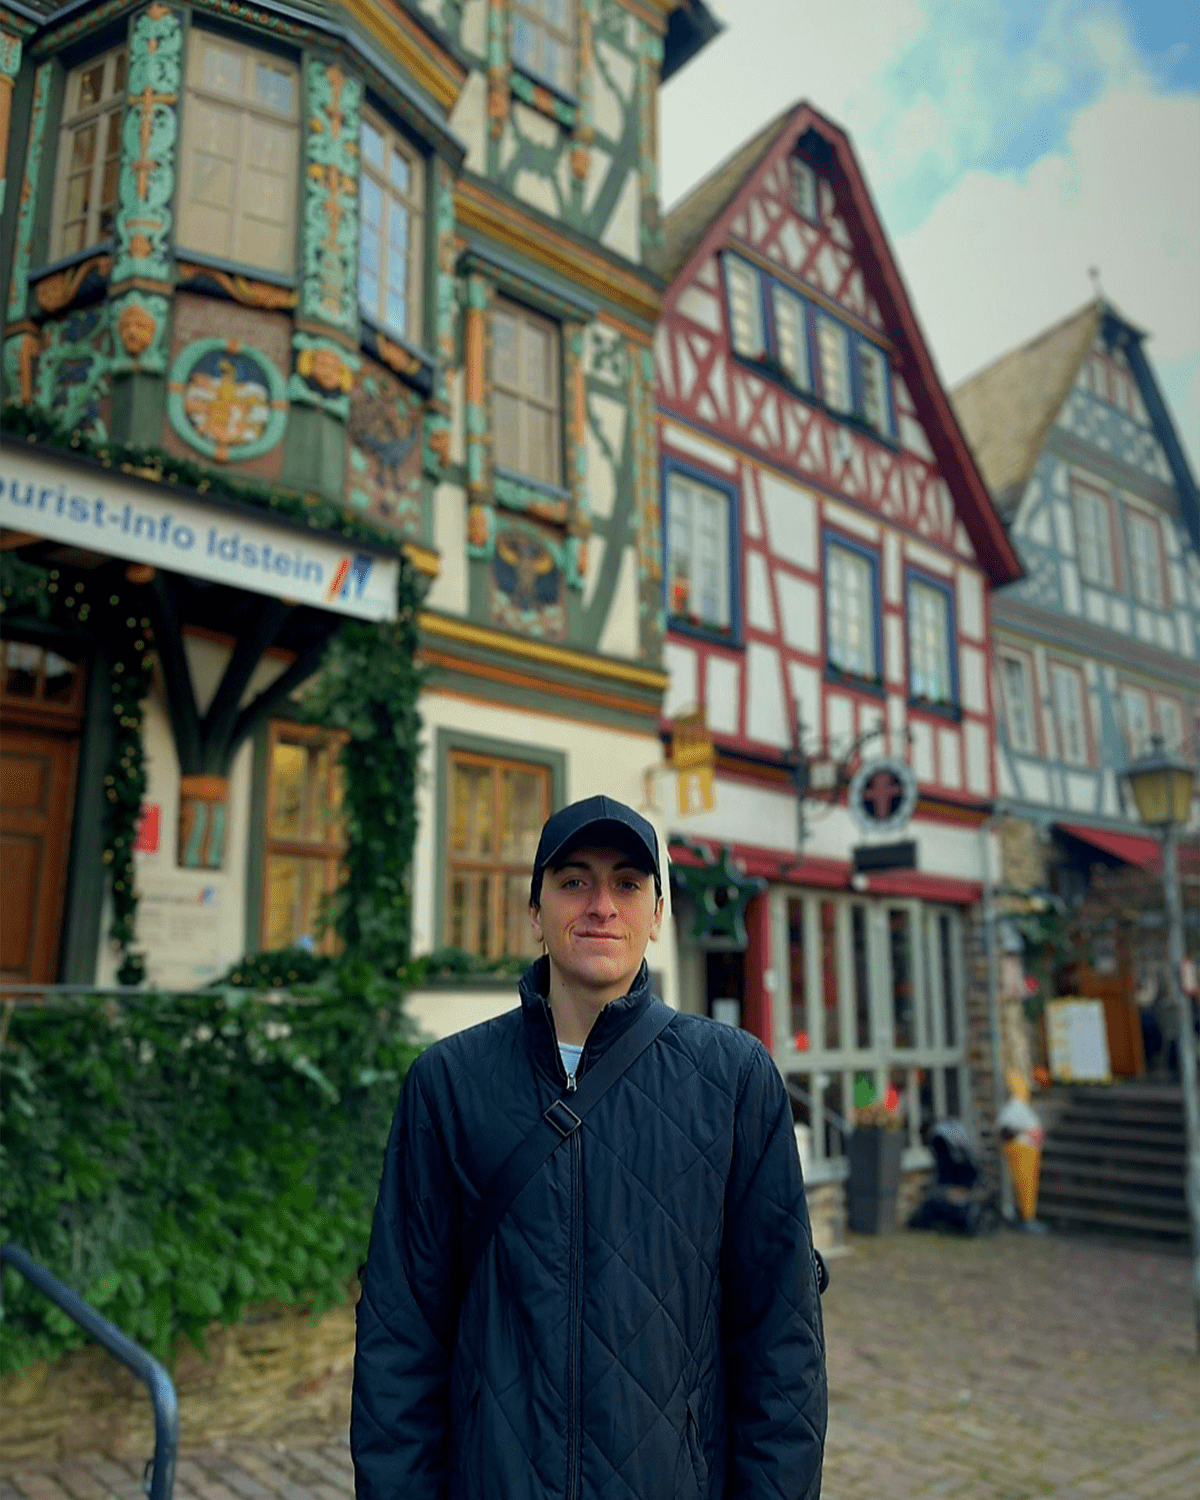 Zackrey Schraeder, shown here in front of some homes in Idstein, Germany, is aiming for an Unmanned Systems career. (Photo: Zackrey Schraeder)